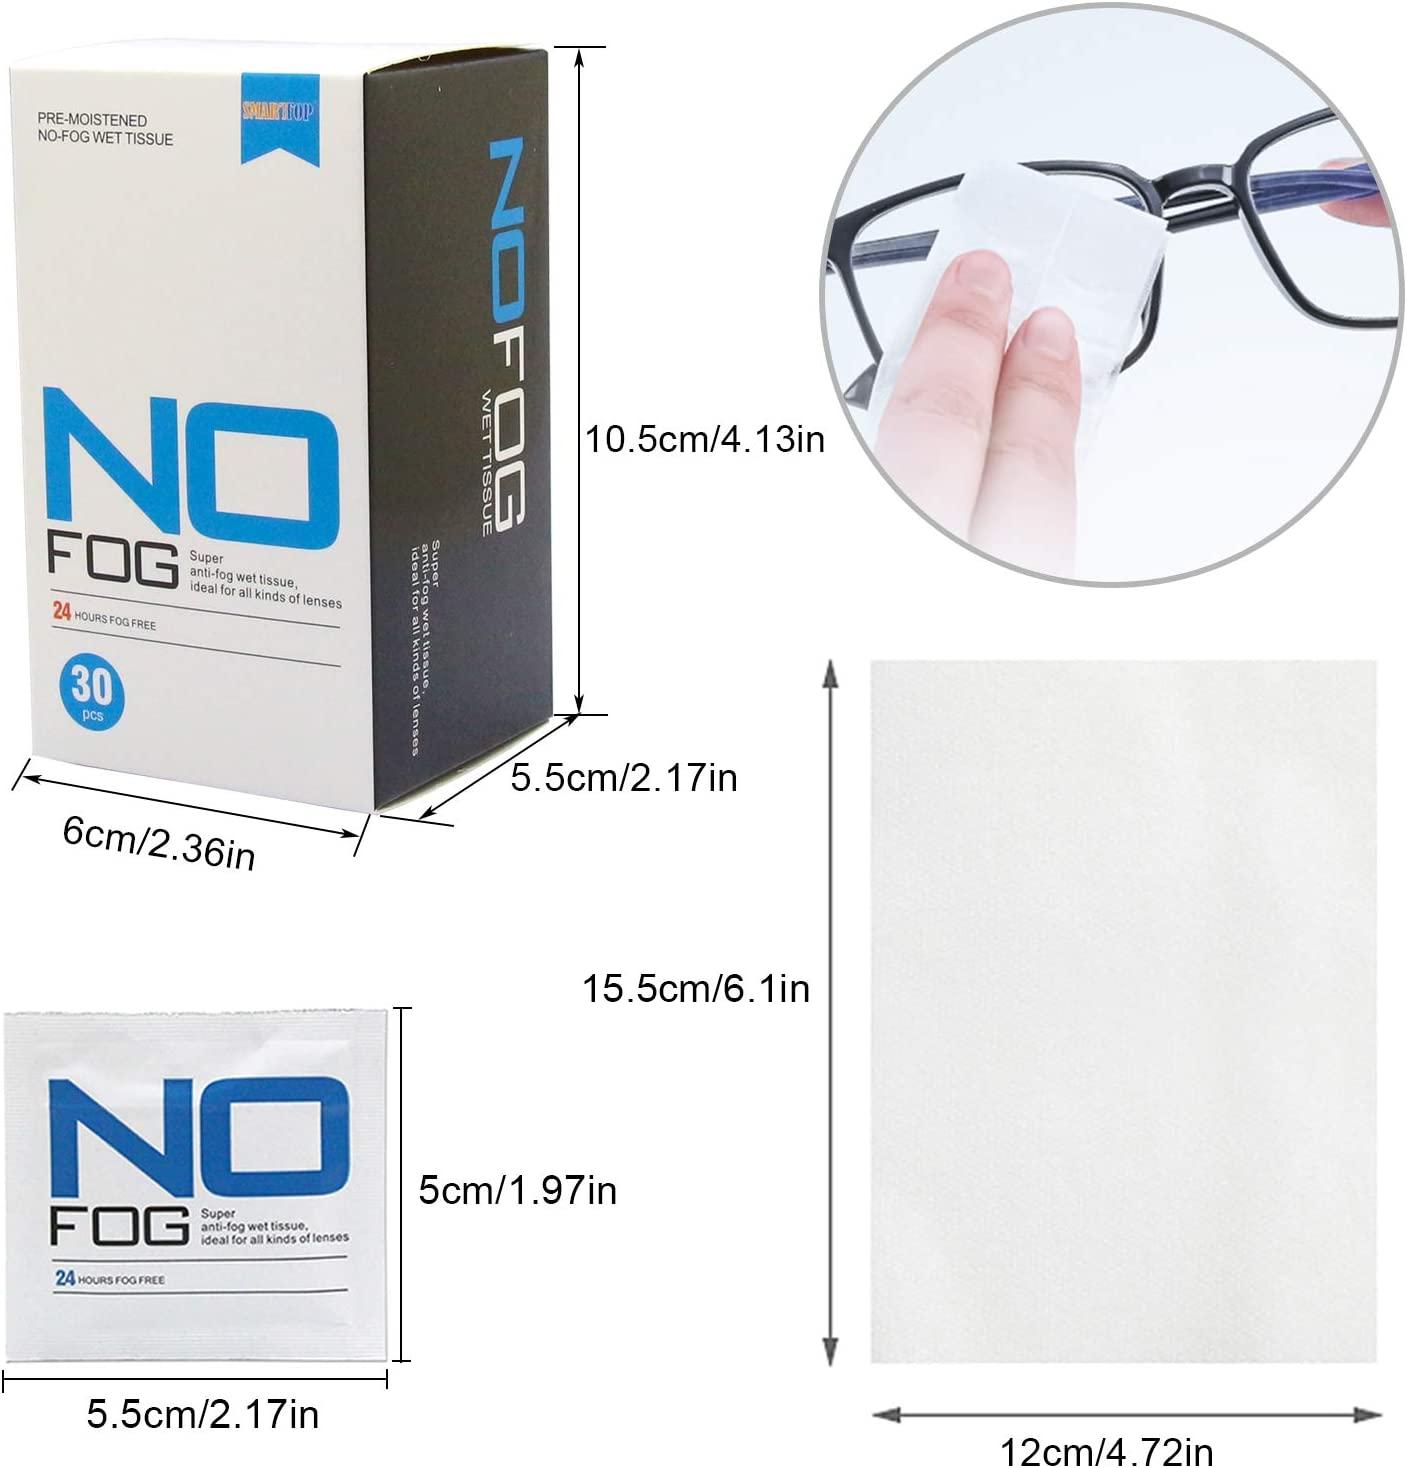 SMARTTOP Anti Fog Lens Wipes, 30 Counts Glasses Wipes Pre-Moistened-Glasses  Cleaner Anti-Fog for Safety Googles, Face Shield, Ski Masks, Sunglasses,  Monitor, Computer, Phone, Screen (30)